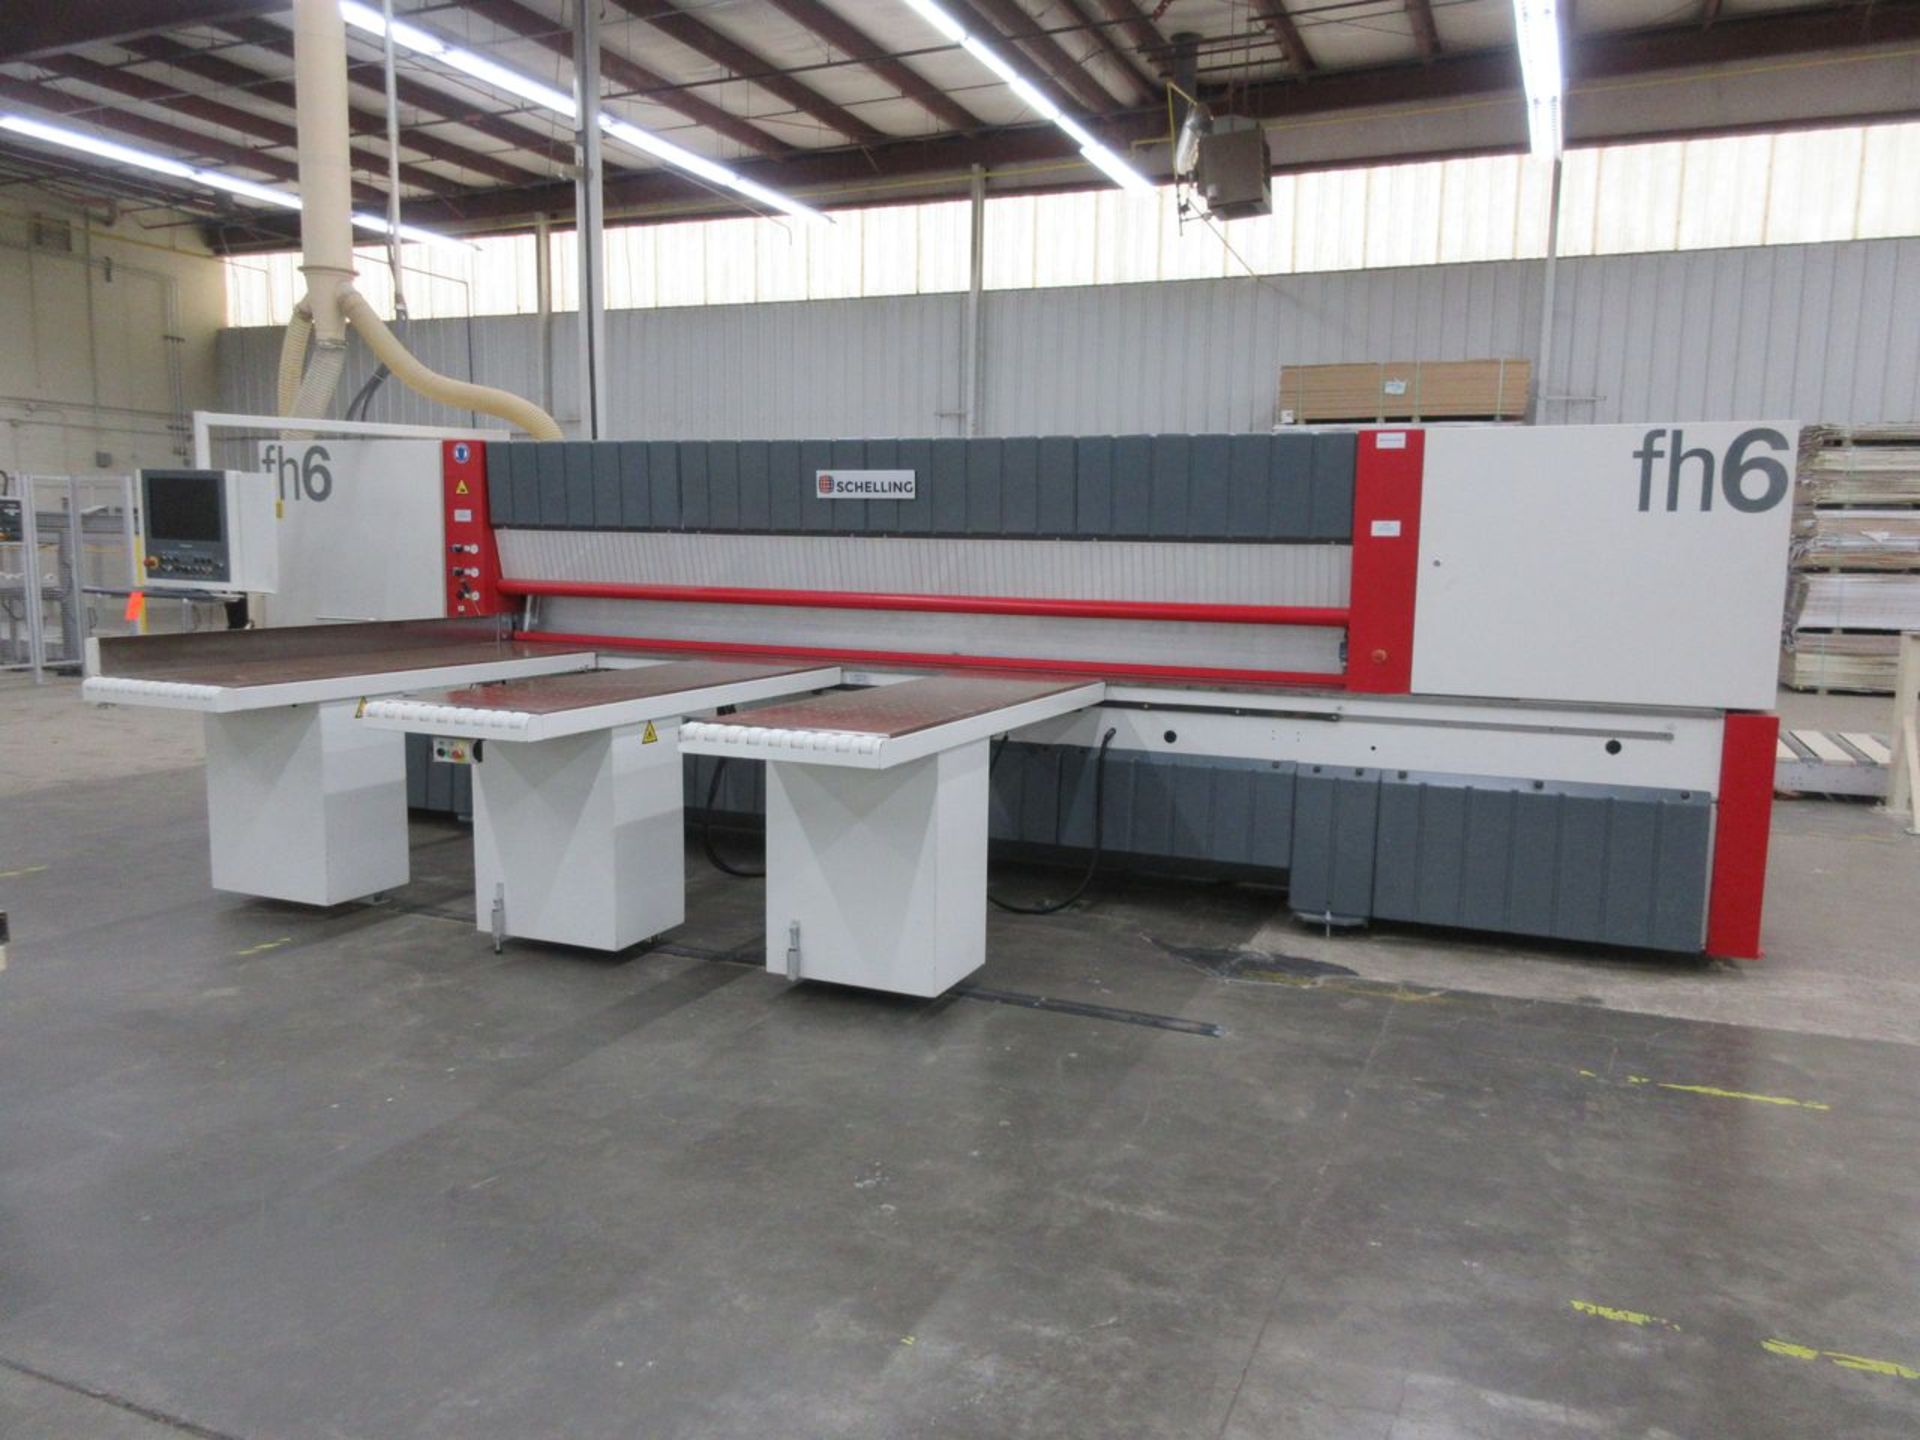 Schelling 14 ft. Model FH 6 430 CNC Rear Loading Horizontal Automatic Cut-to-Size Panel Saw, S/N: - Image 4 of 22